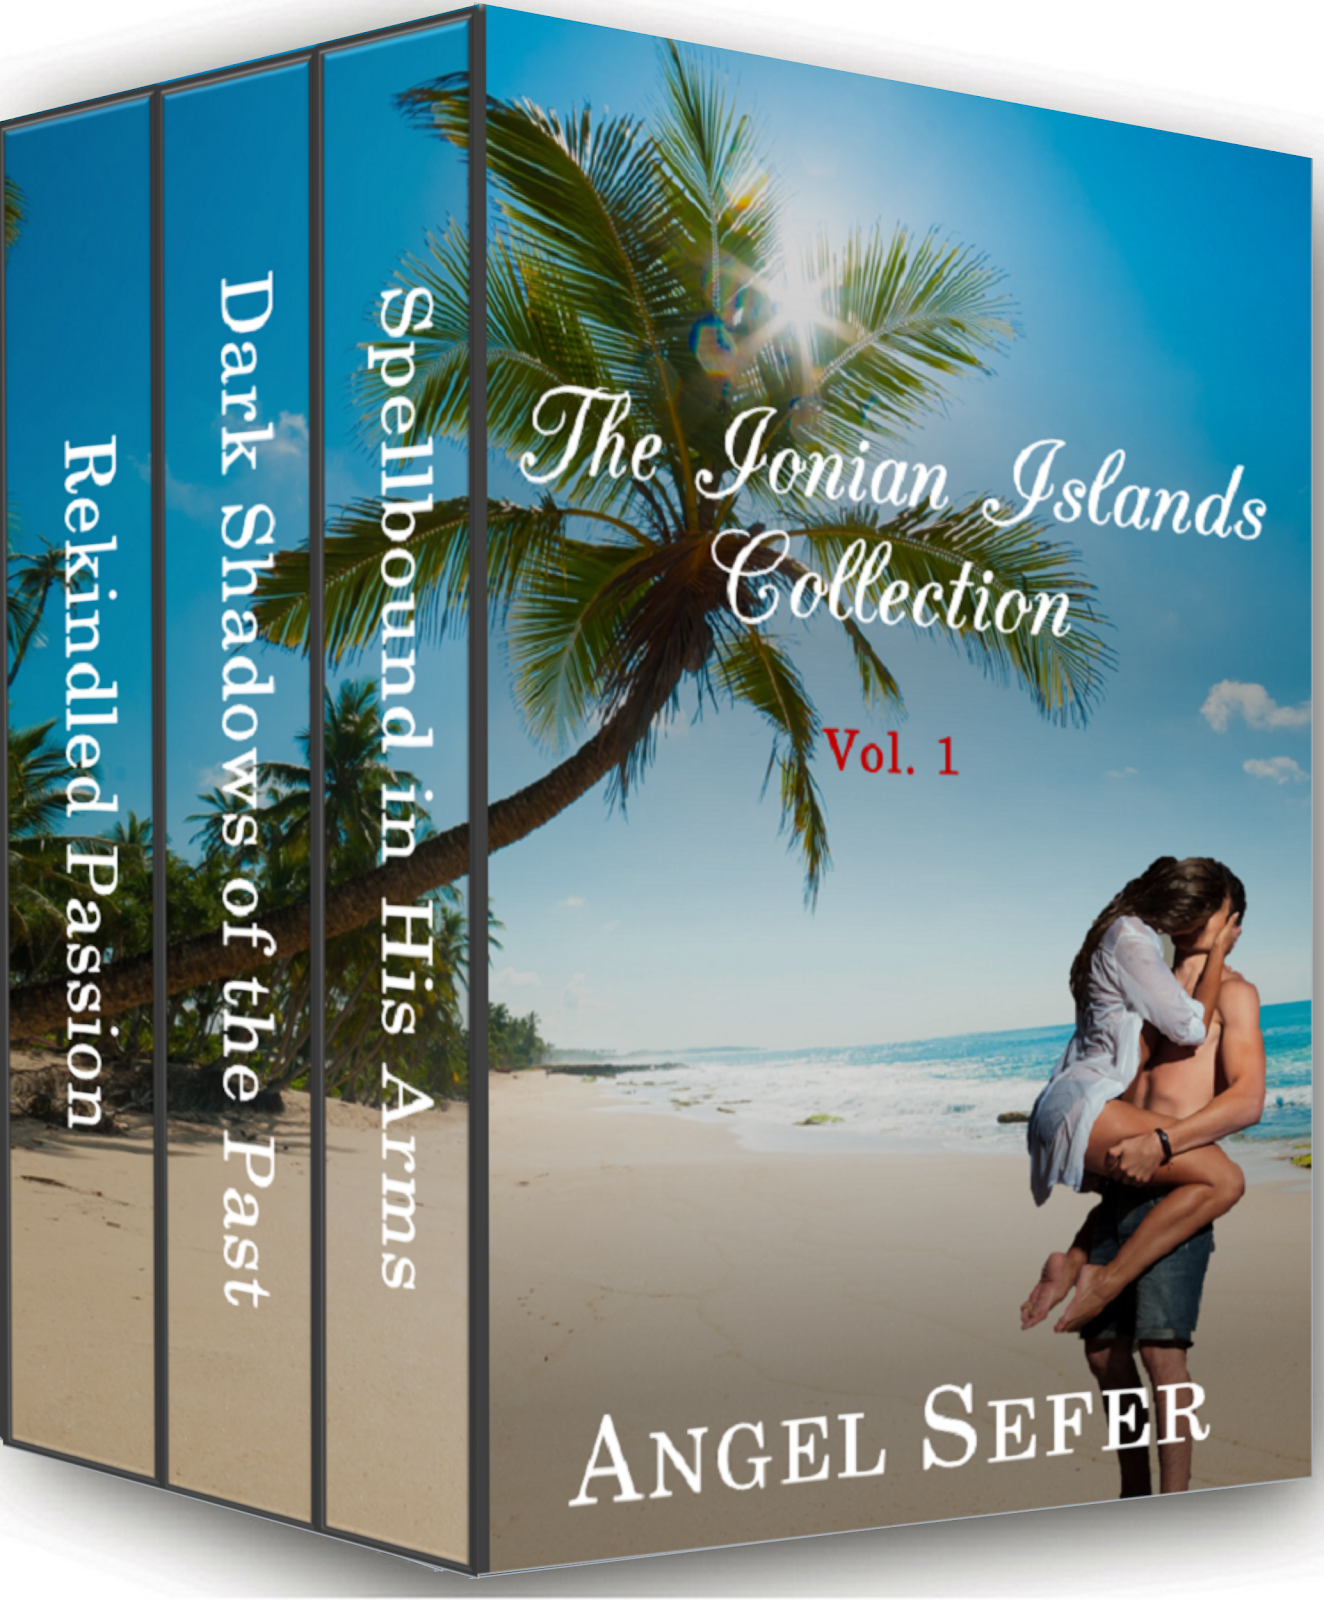 The Ionian Islands Collection Vol. 1